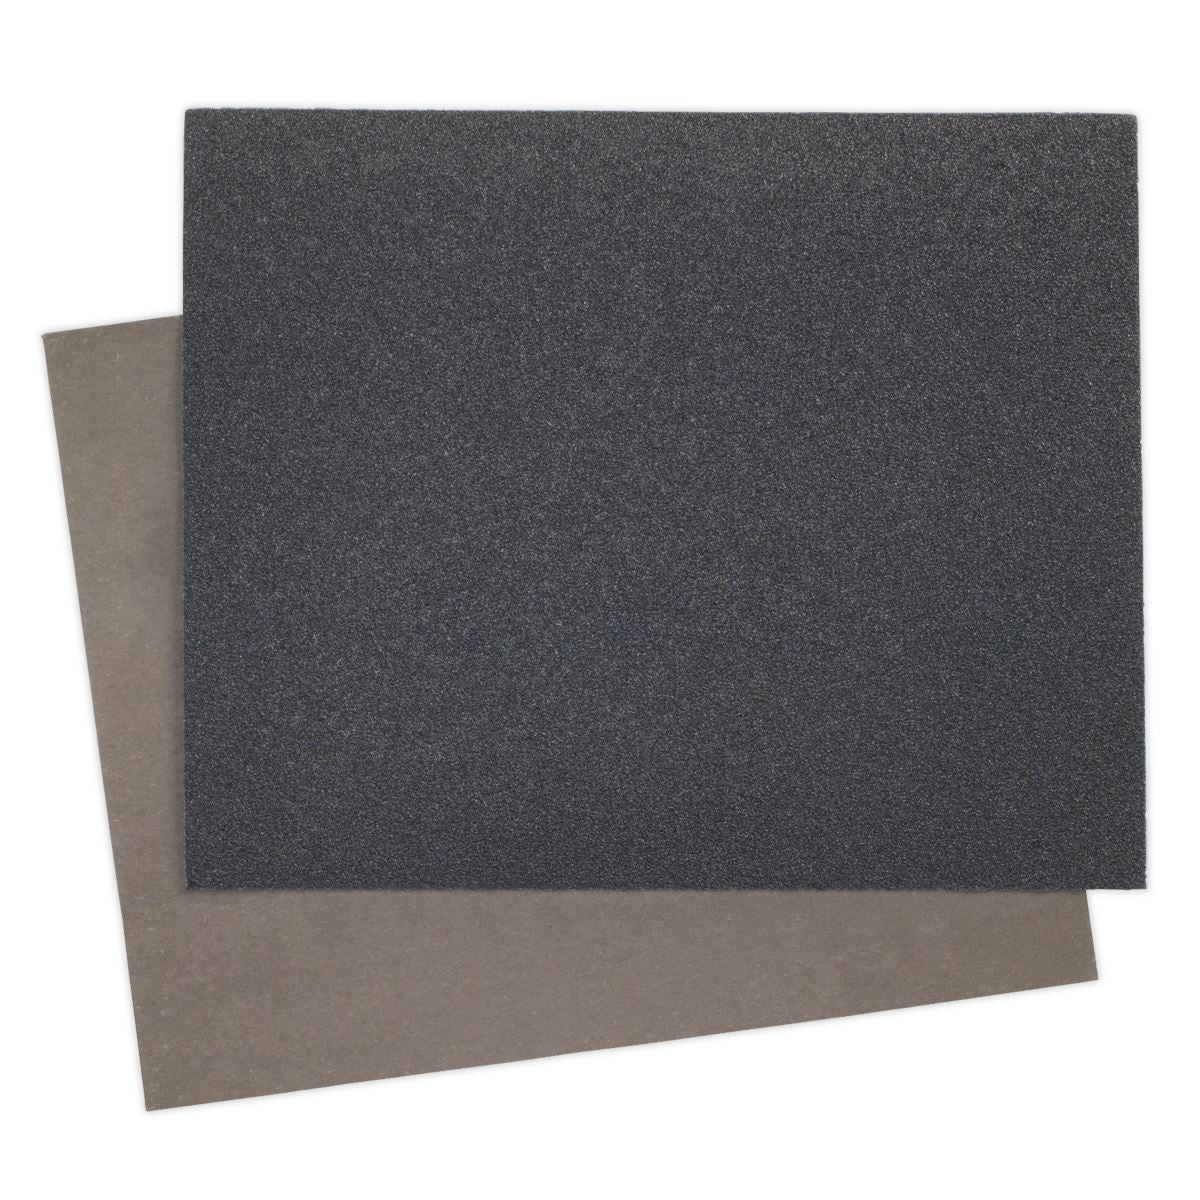 Sealey Wet & Dry Paper 230 x 280mm 800Grit Pack of 25